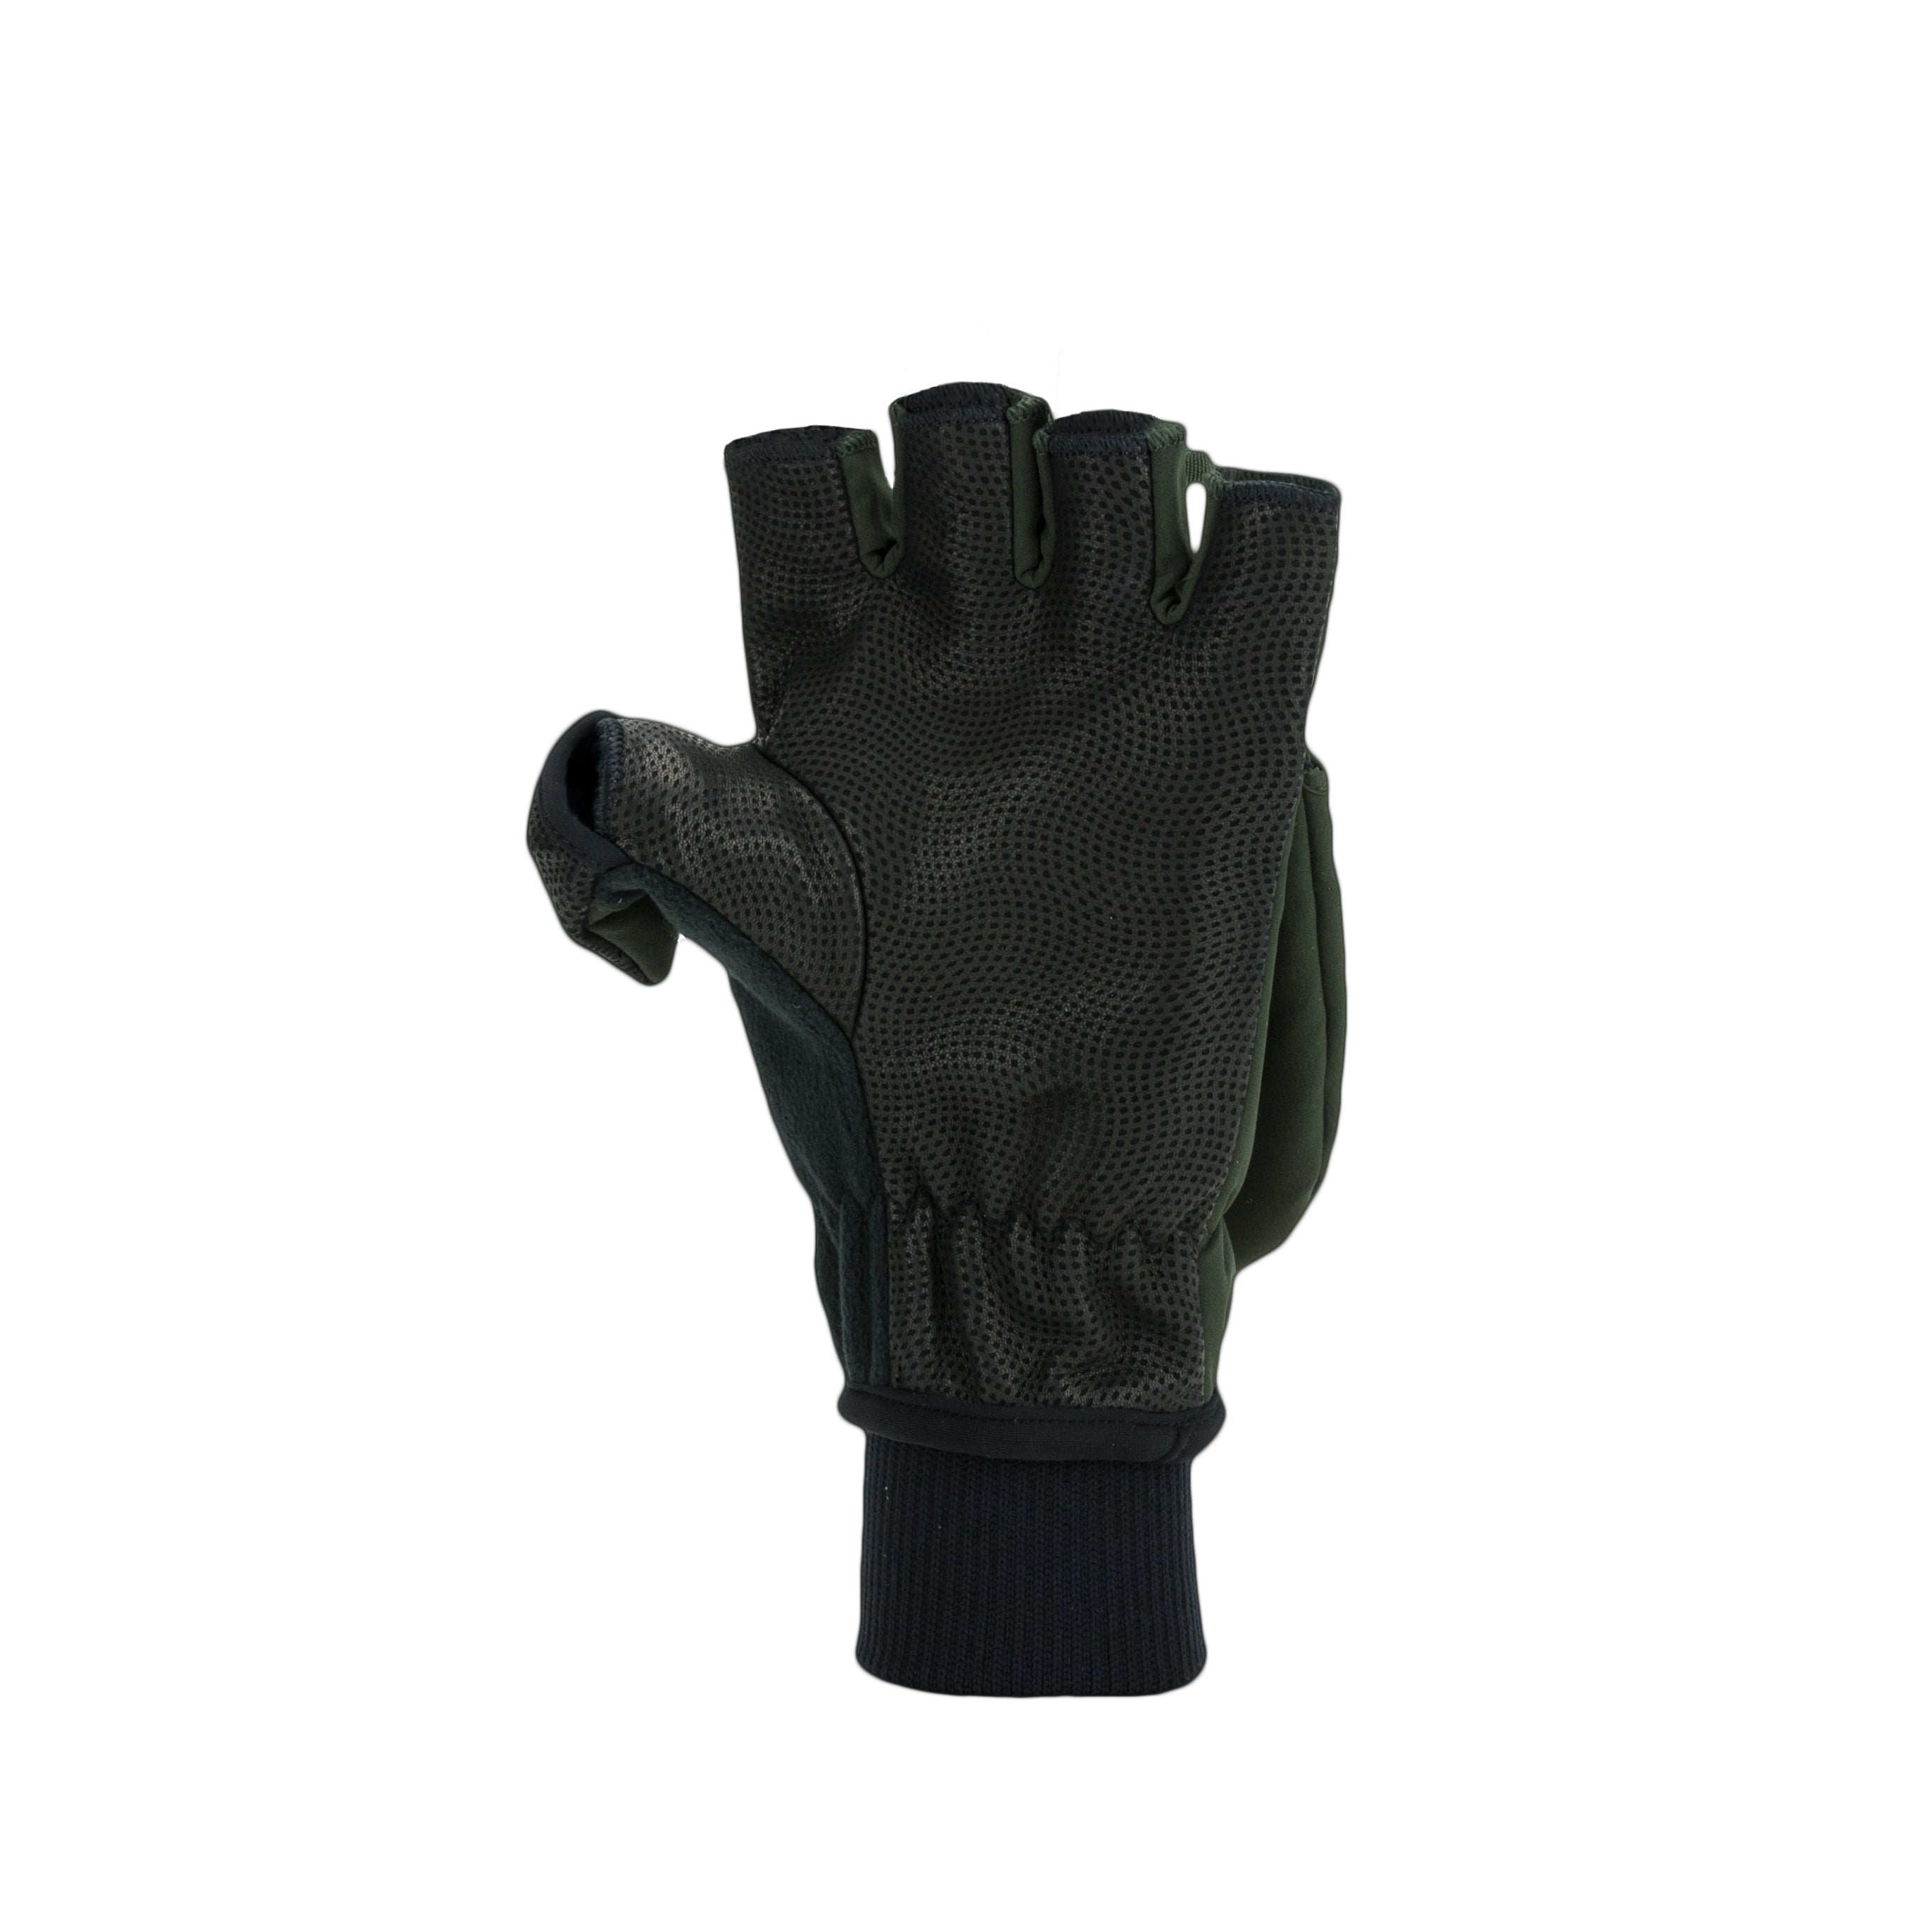 Windproof Cold Weather Convertible Mitt - Size: S, M, L, XL, XXL - Color: Olive Green / Black